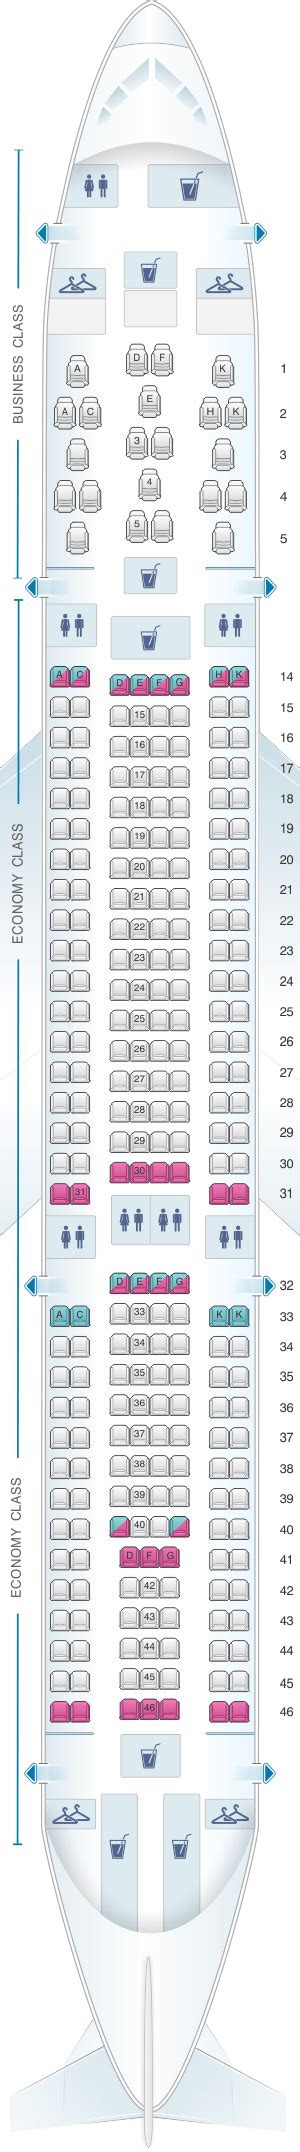 Airbus A330 Seating Chart United Airlines Awesome Home